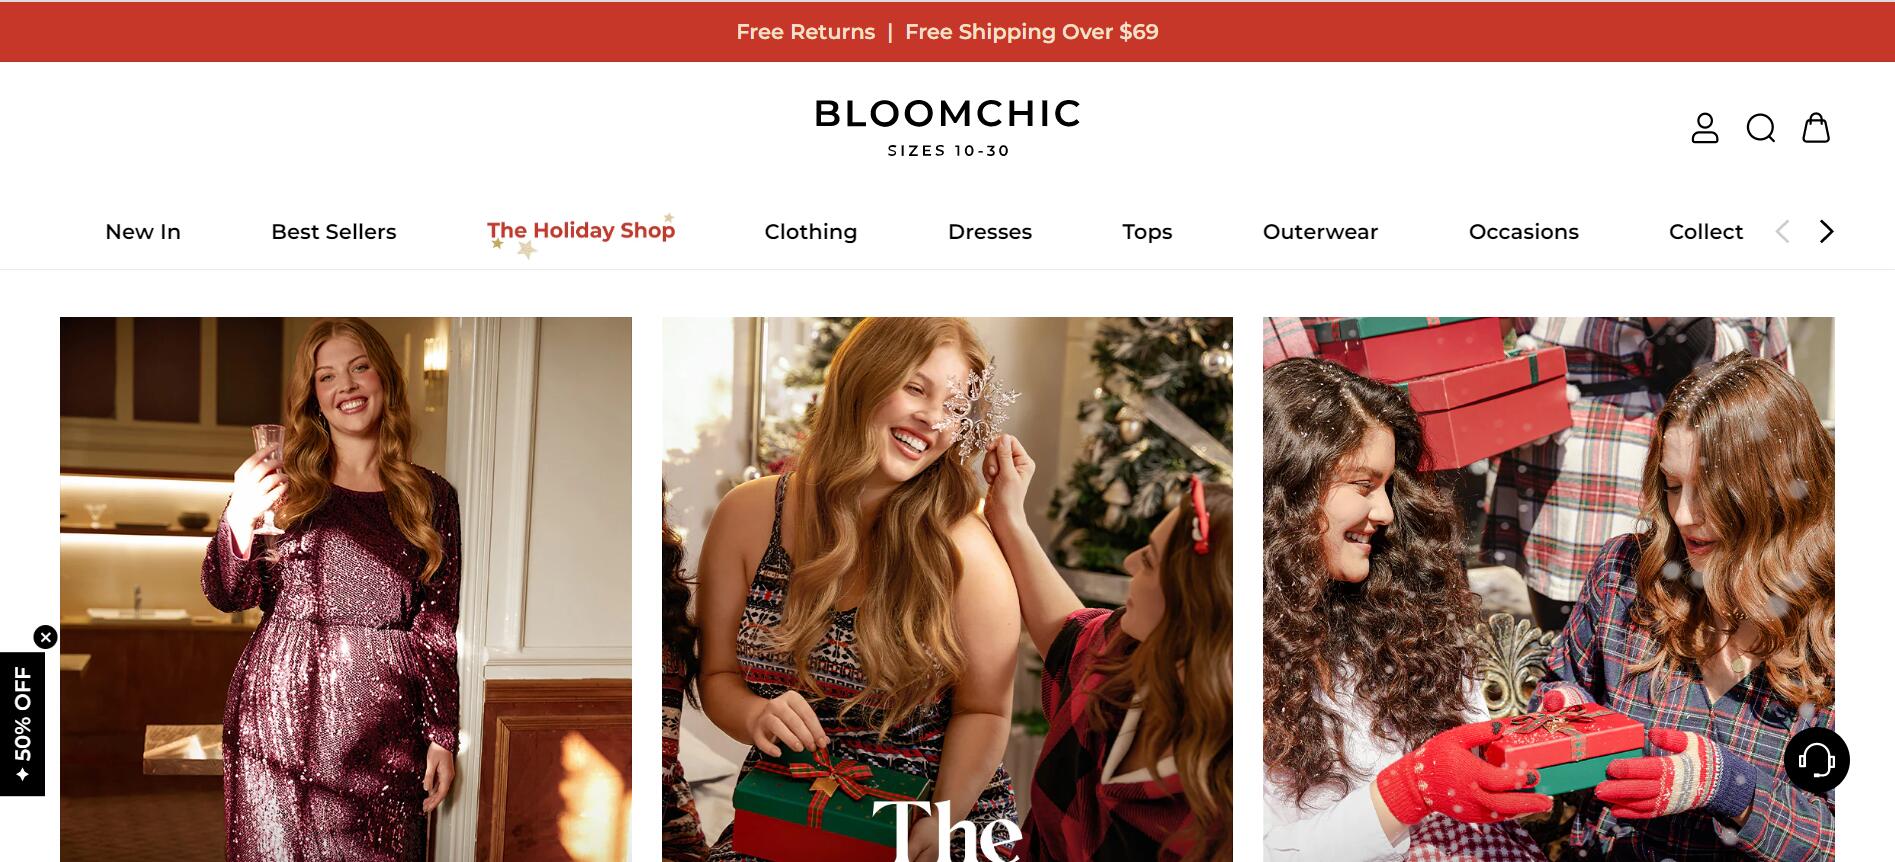 L Catterton Invests in BloomChic, Aiming at Global Plus-size Women Consumers